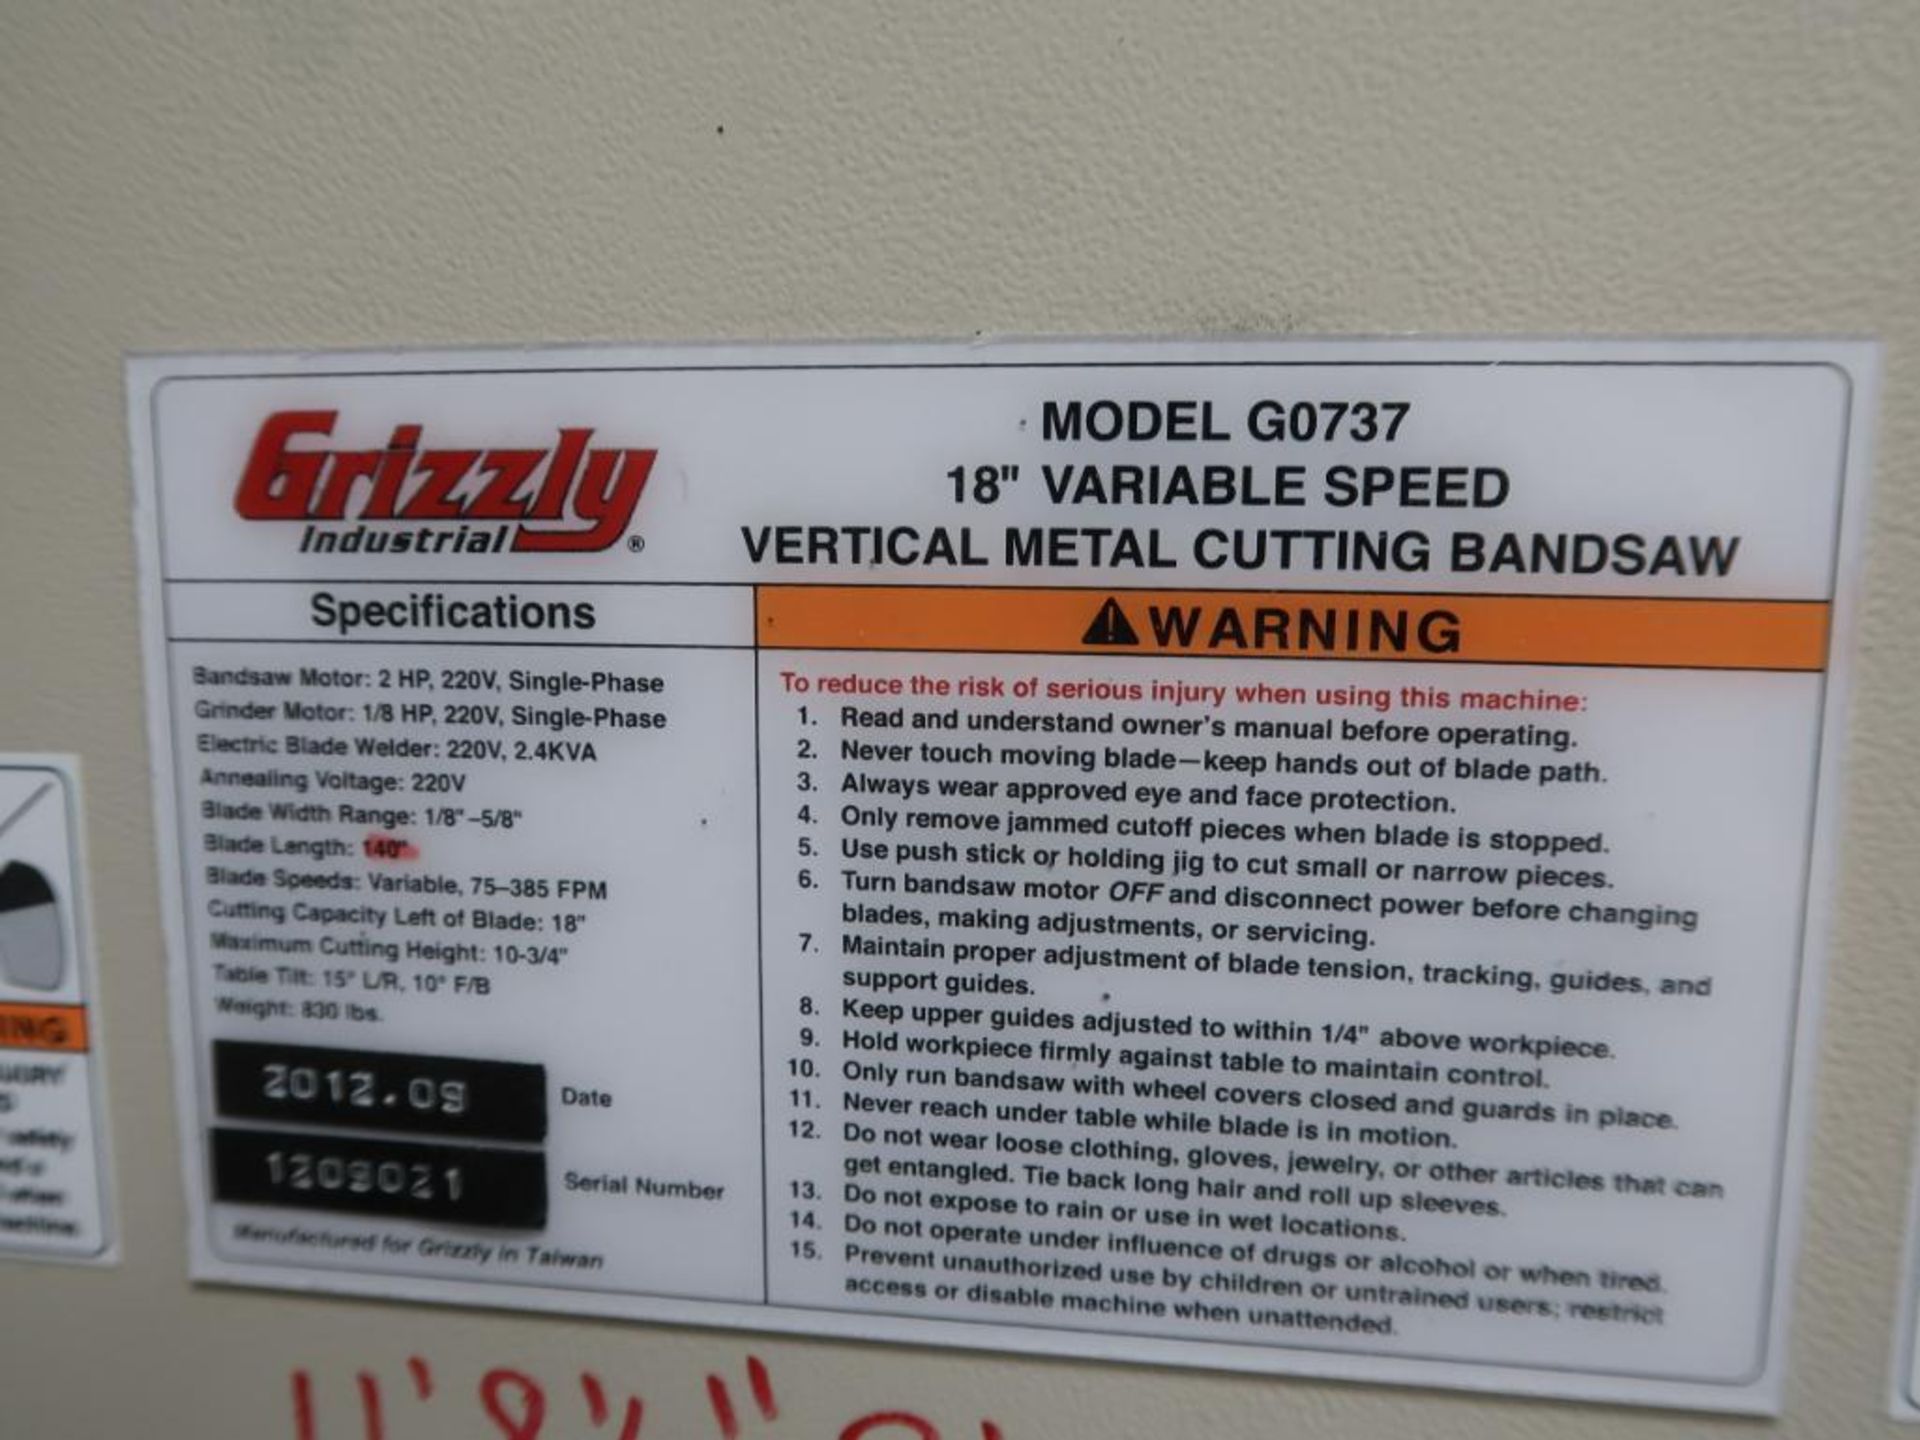 Grizzly 18 in. Variable Speed Band Saw / Welder Model G0737, S/N 1209021 (2012) - Image 3 of 3